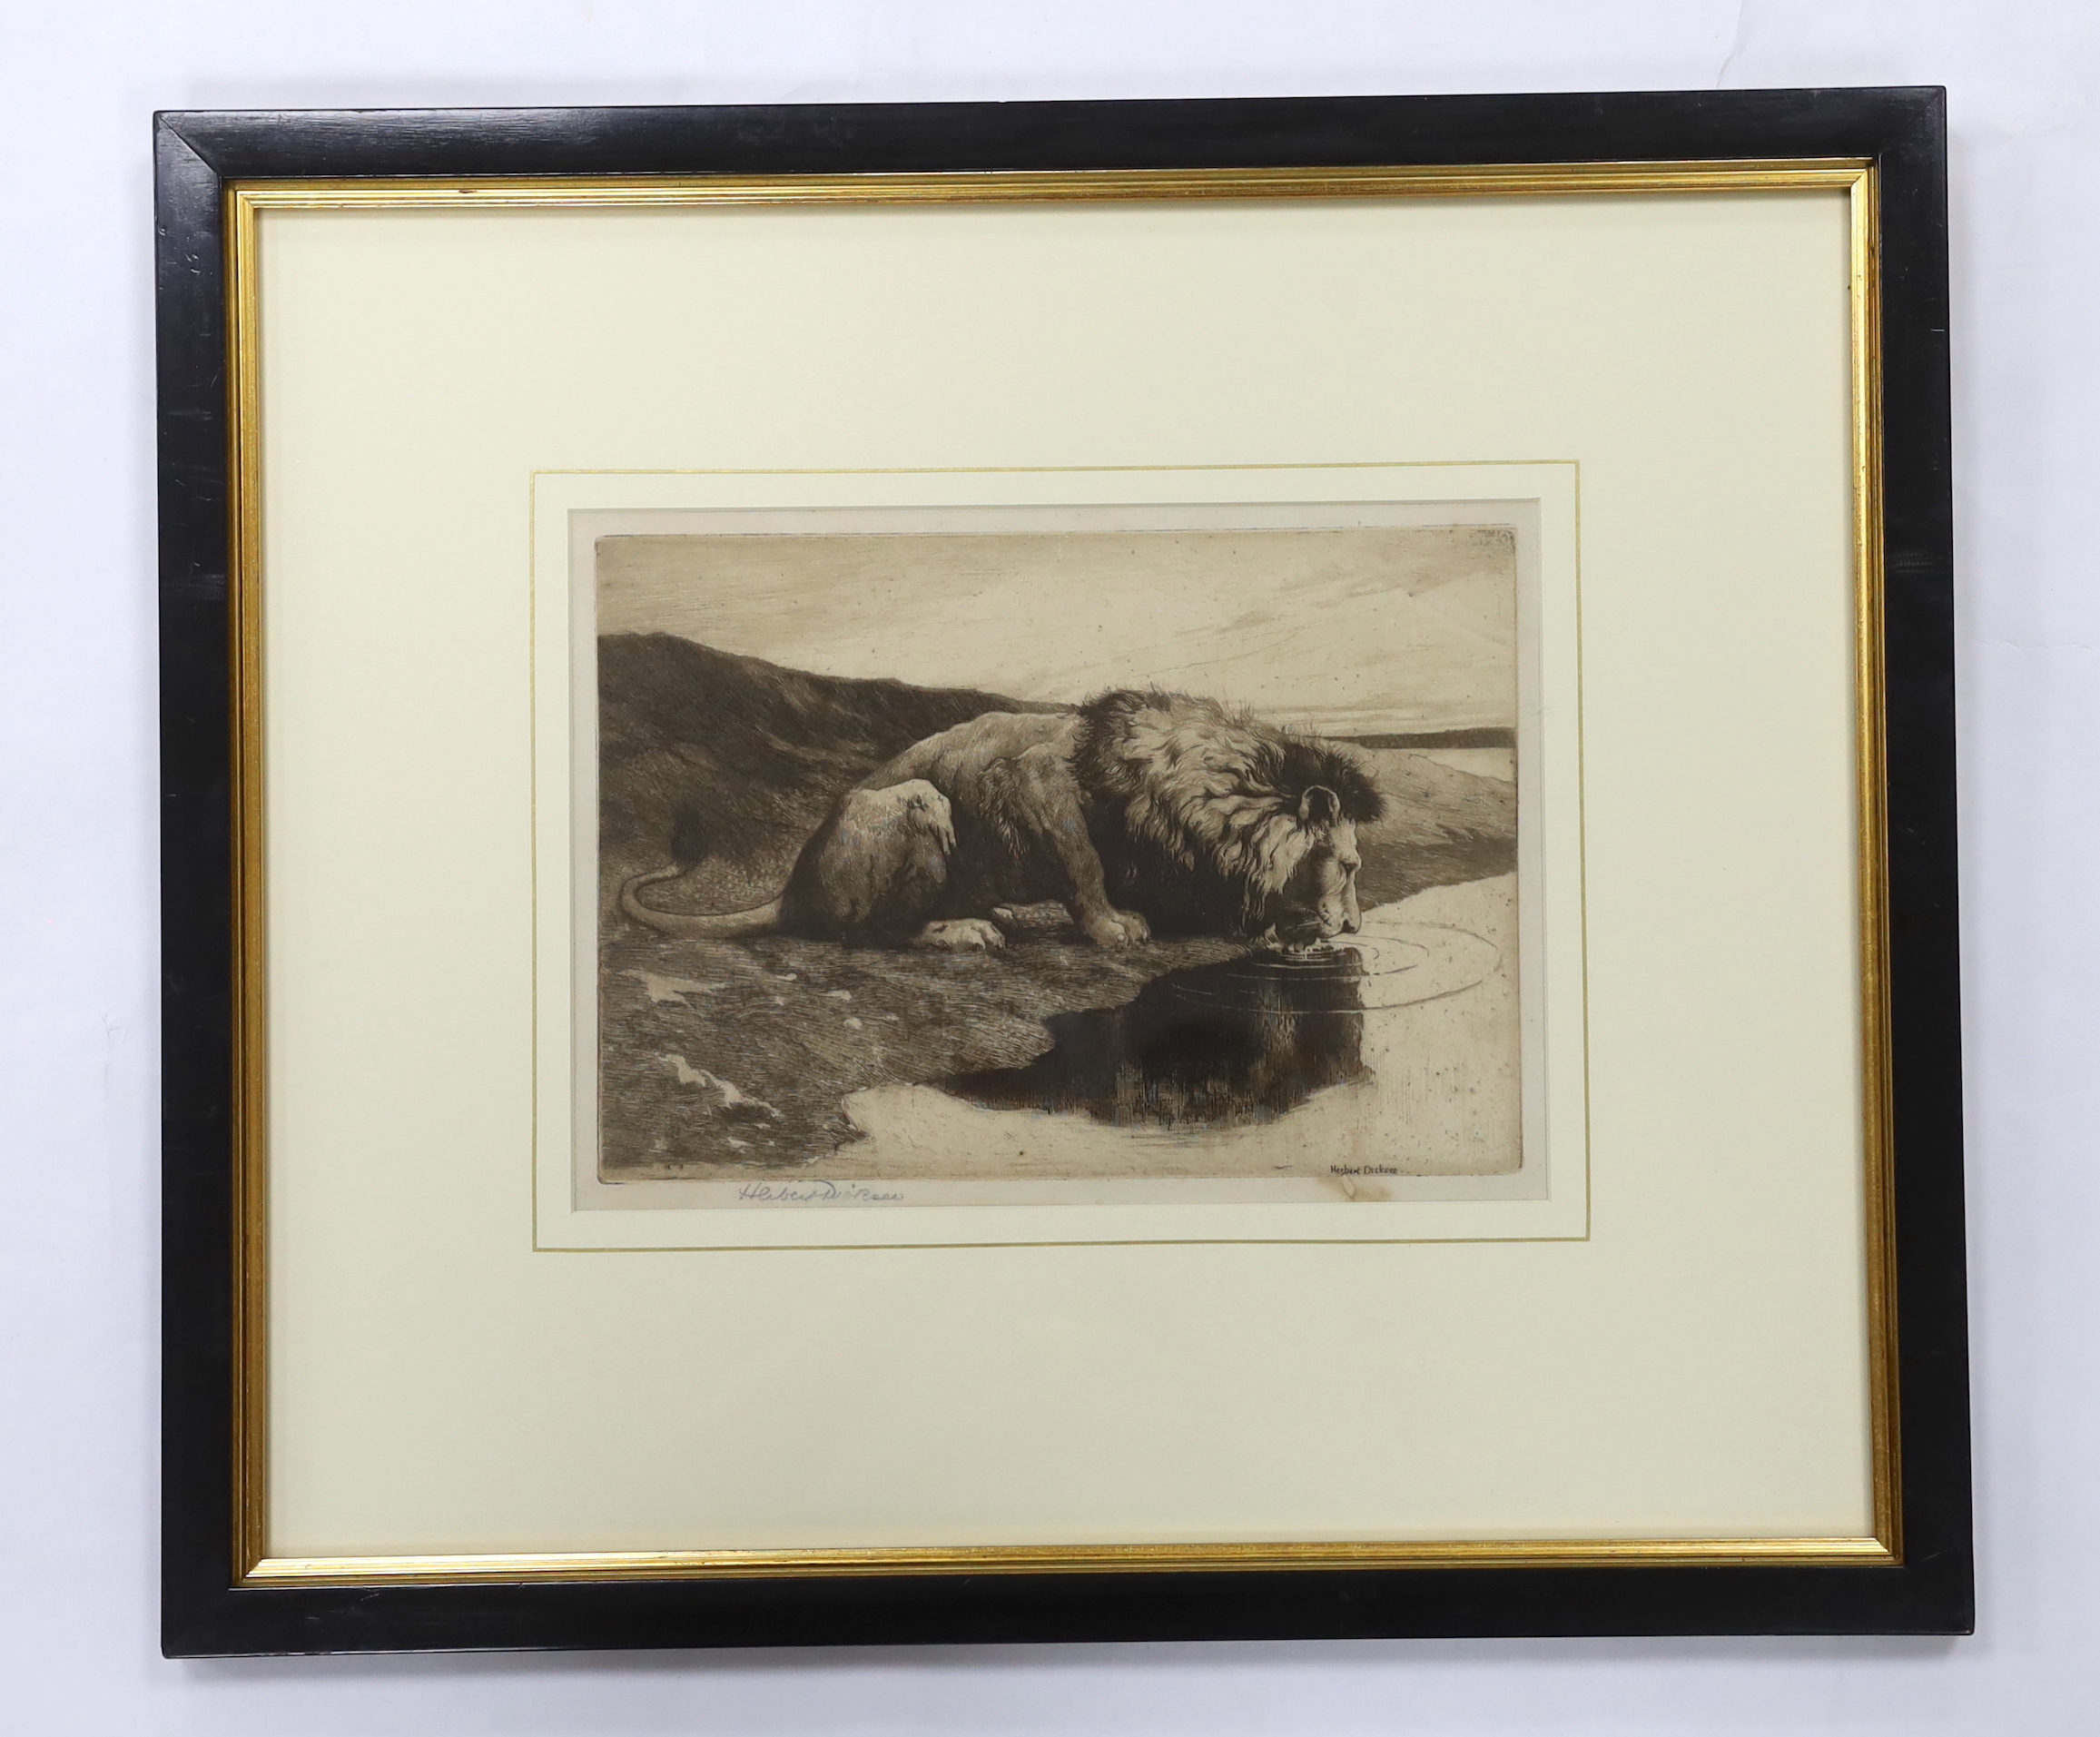 Herbert Dicksee (1862-1942), etching, Lion Drinking, signed in pencil, publ. 1890, 19 x 26cm